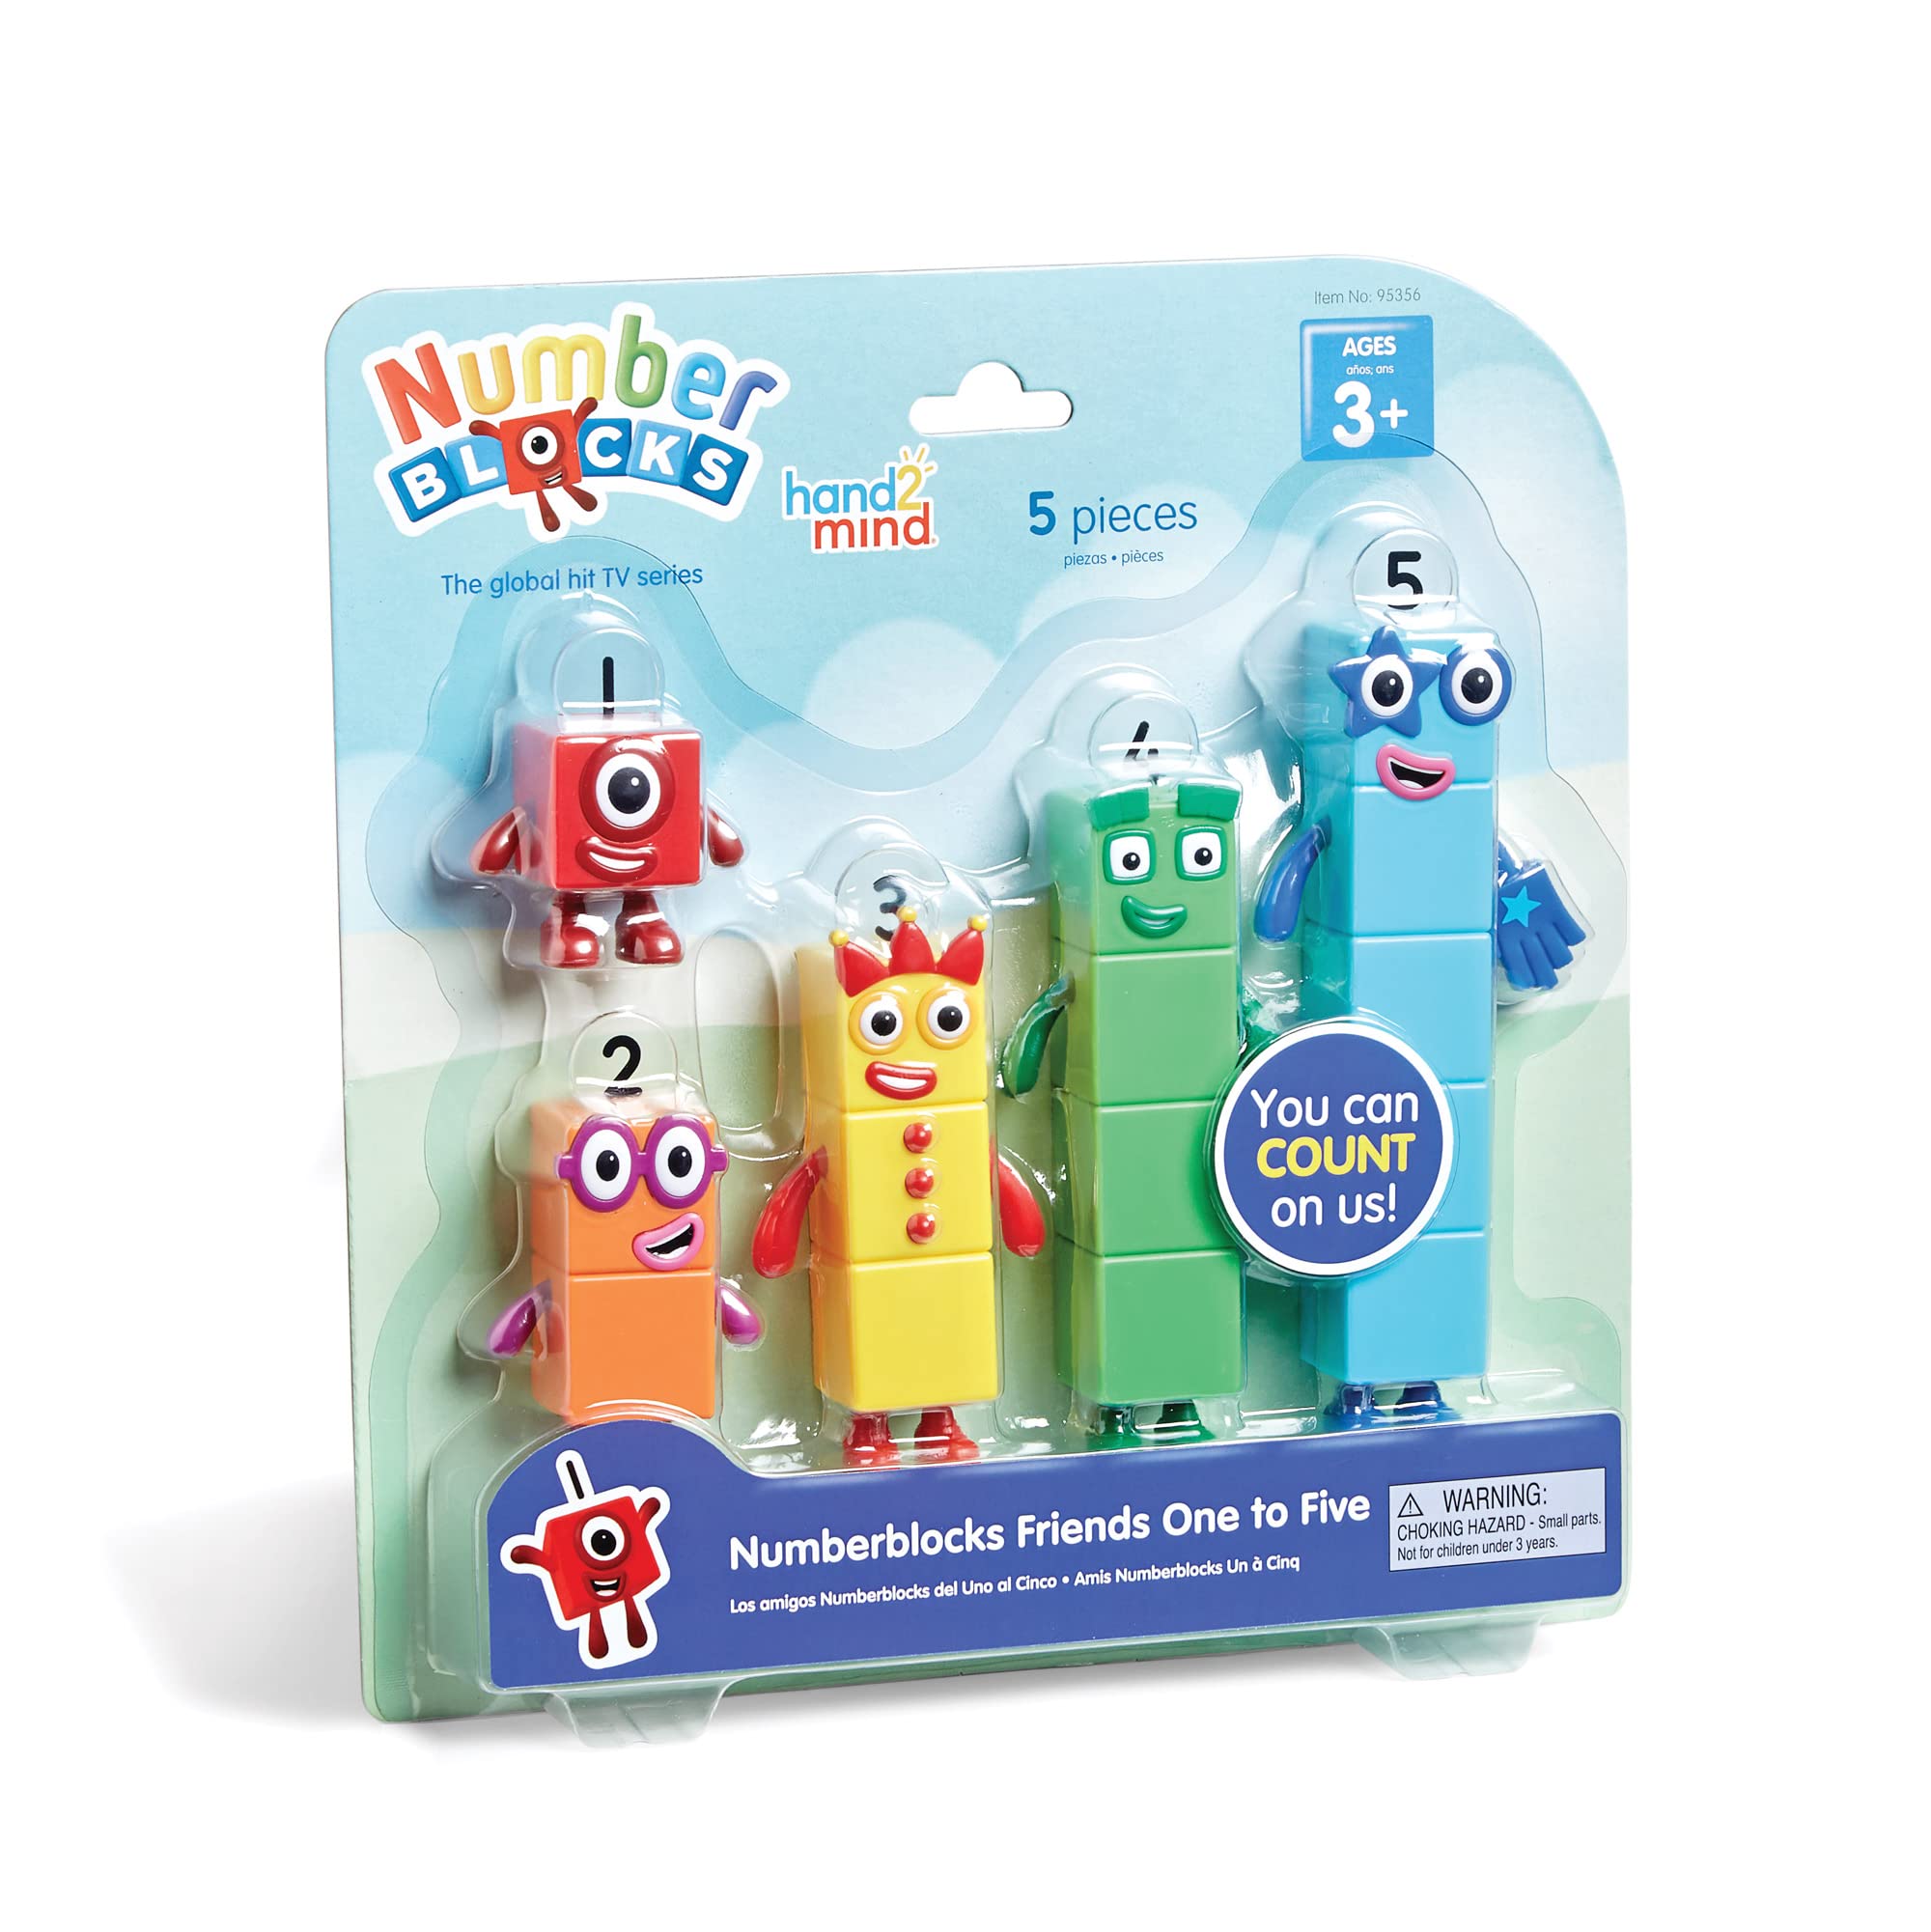 hand2mind Numberblocks Friends One to Five Figures $9.23 + Free Shipping w/ Prime or on $35+